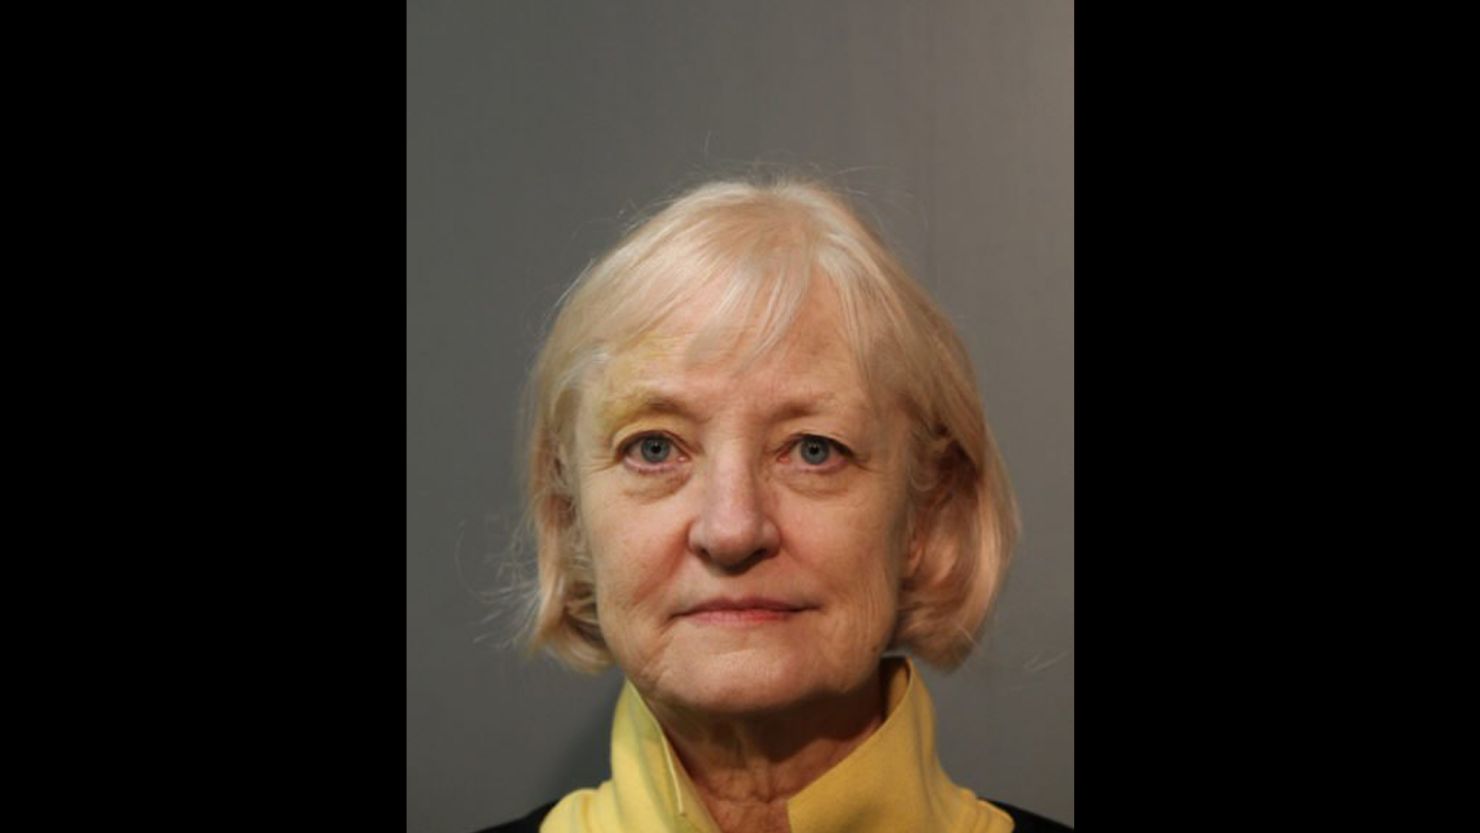 Police arrested Marilyn Hartman at O'Hare Airport Wednesday, calling her a "habitual trespasser and stowaway."